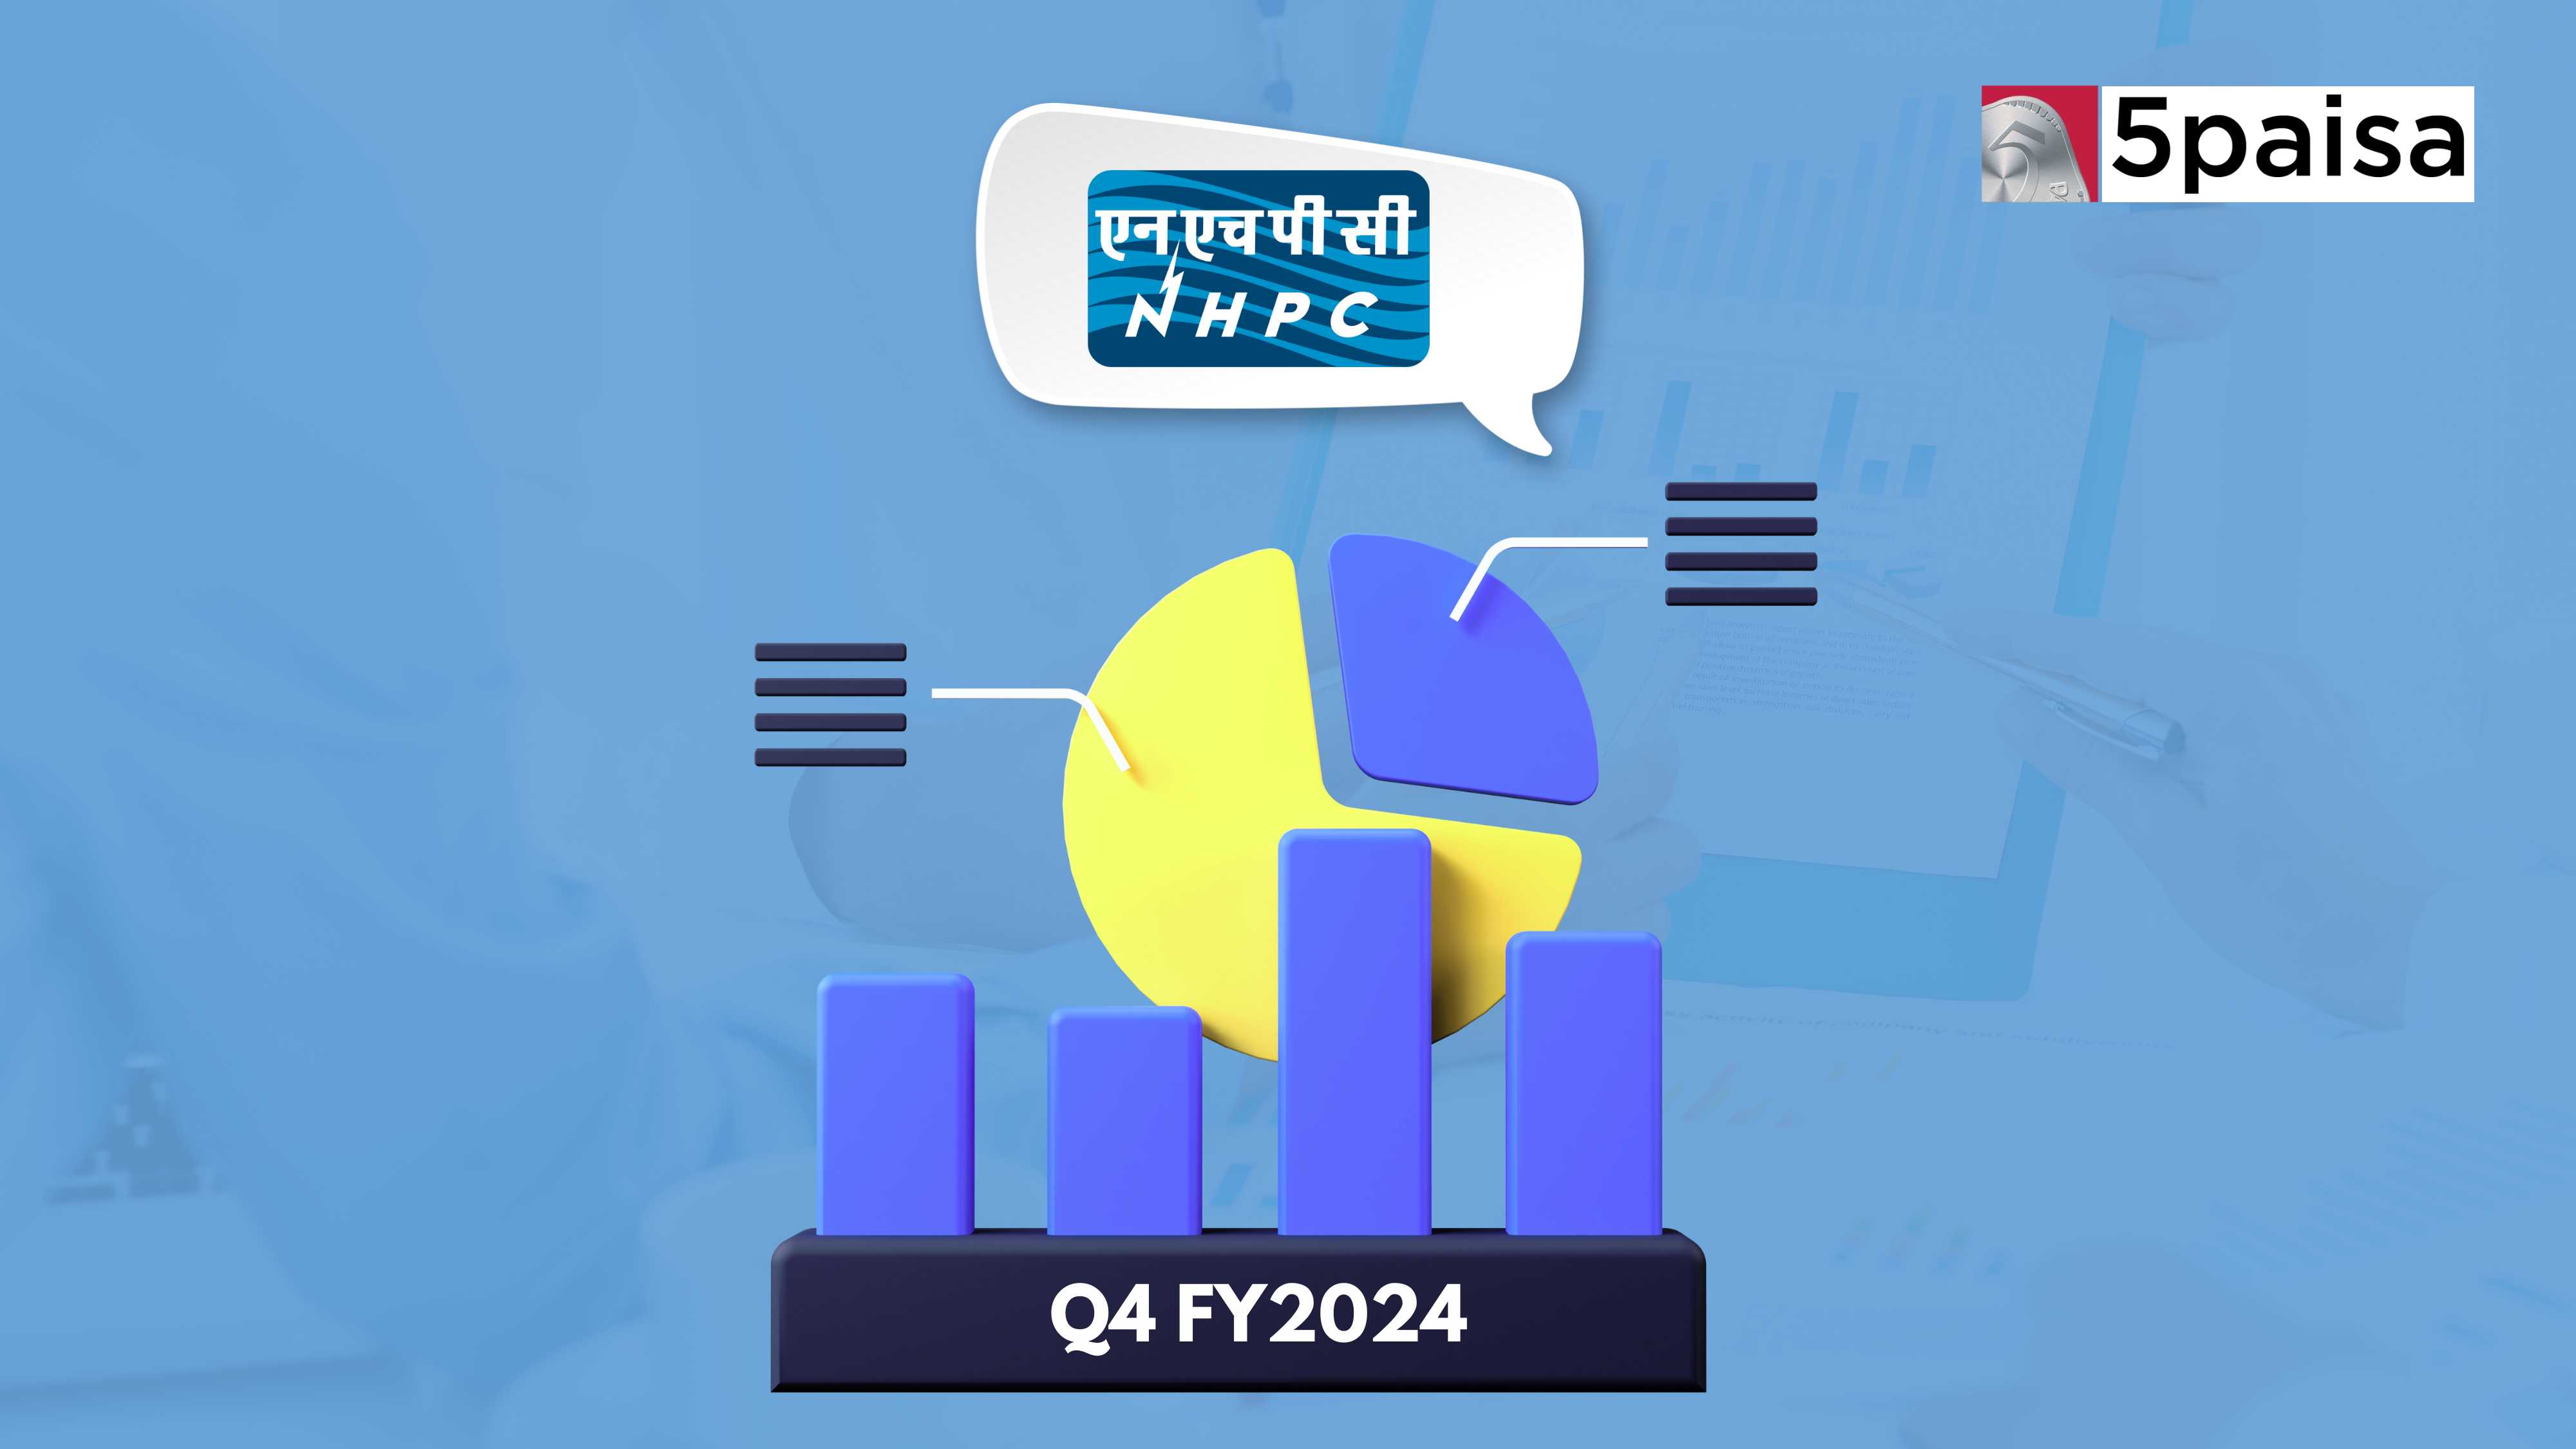 NHPC Limited announced Q4 FY2024 Results, consolidated PAT down by 18% while revenue up by 4% on a YOY basis